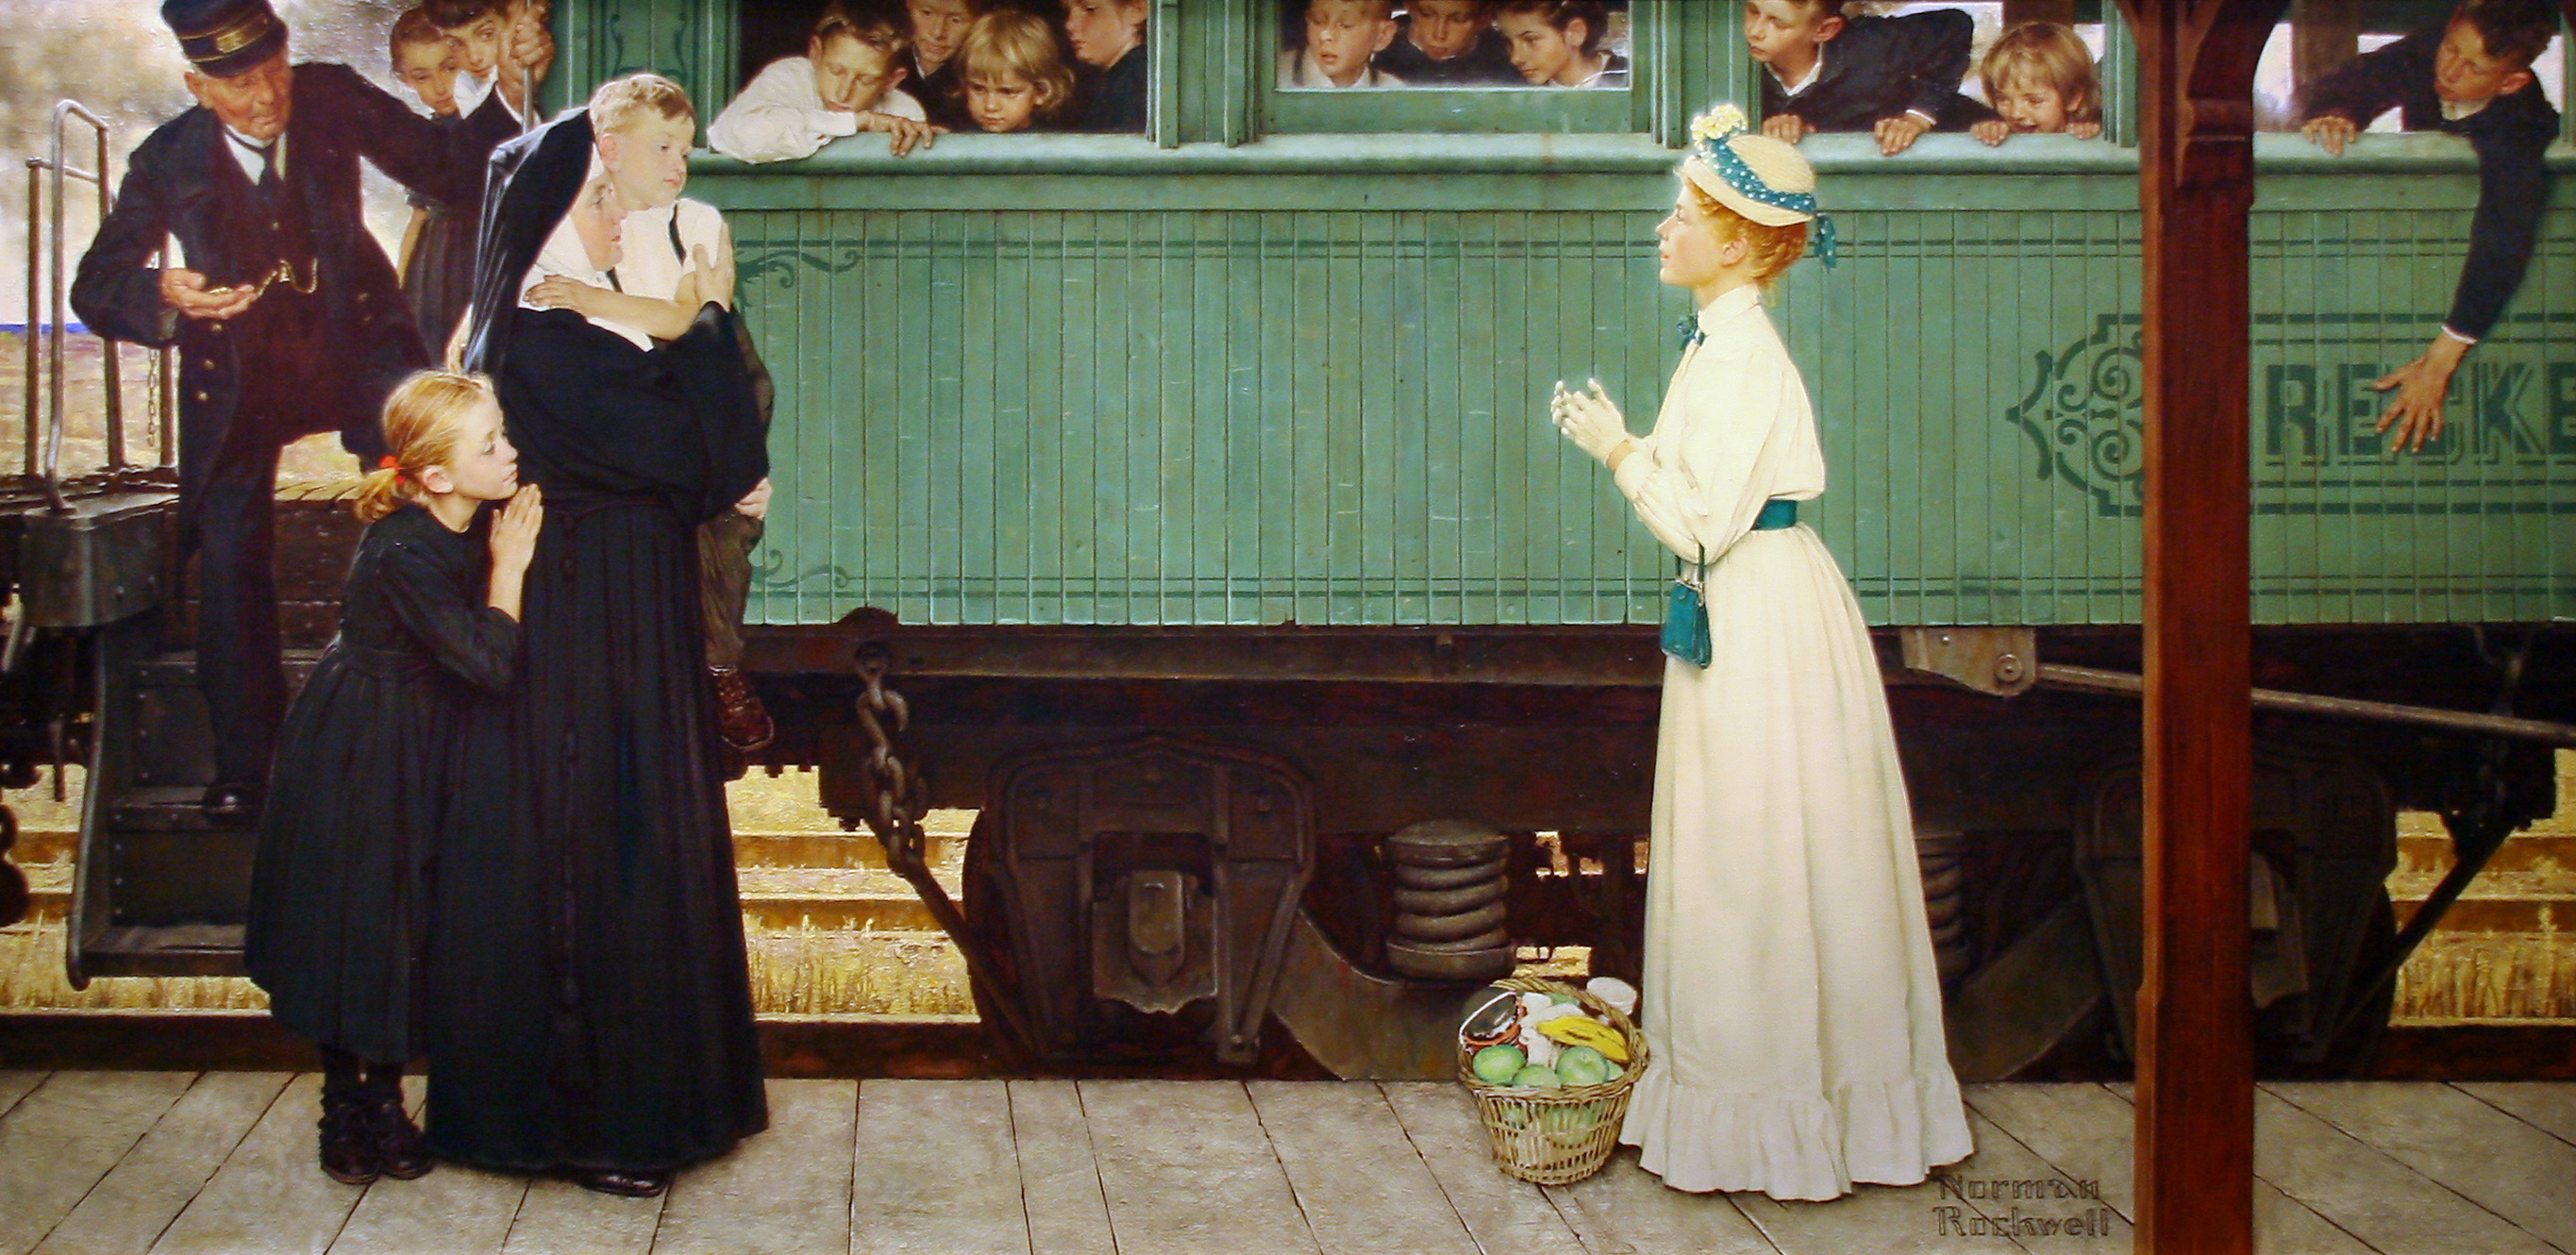 Painting of a woman adopting an orphan boy off a train.